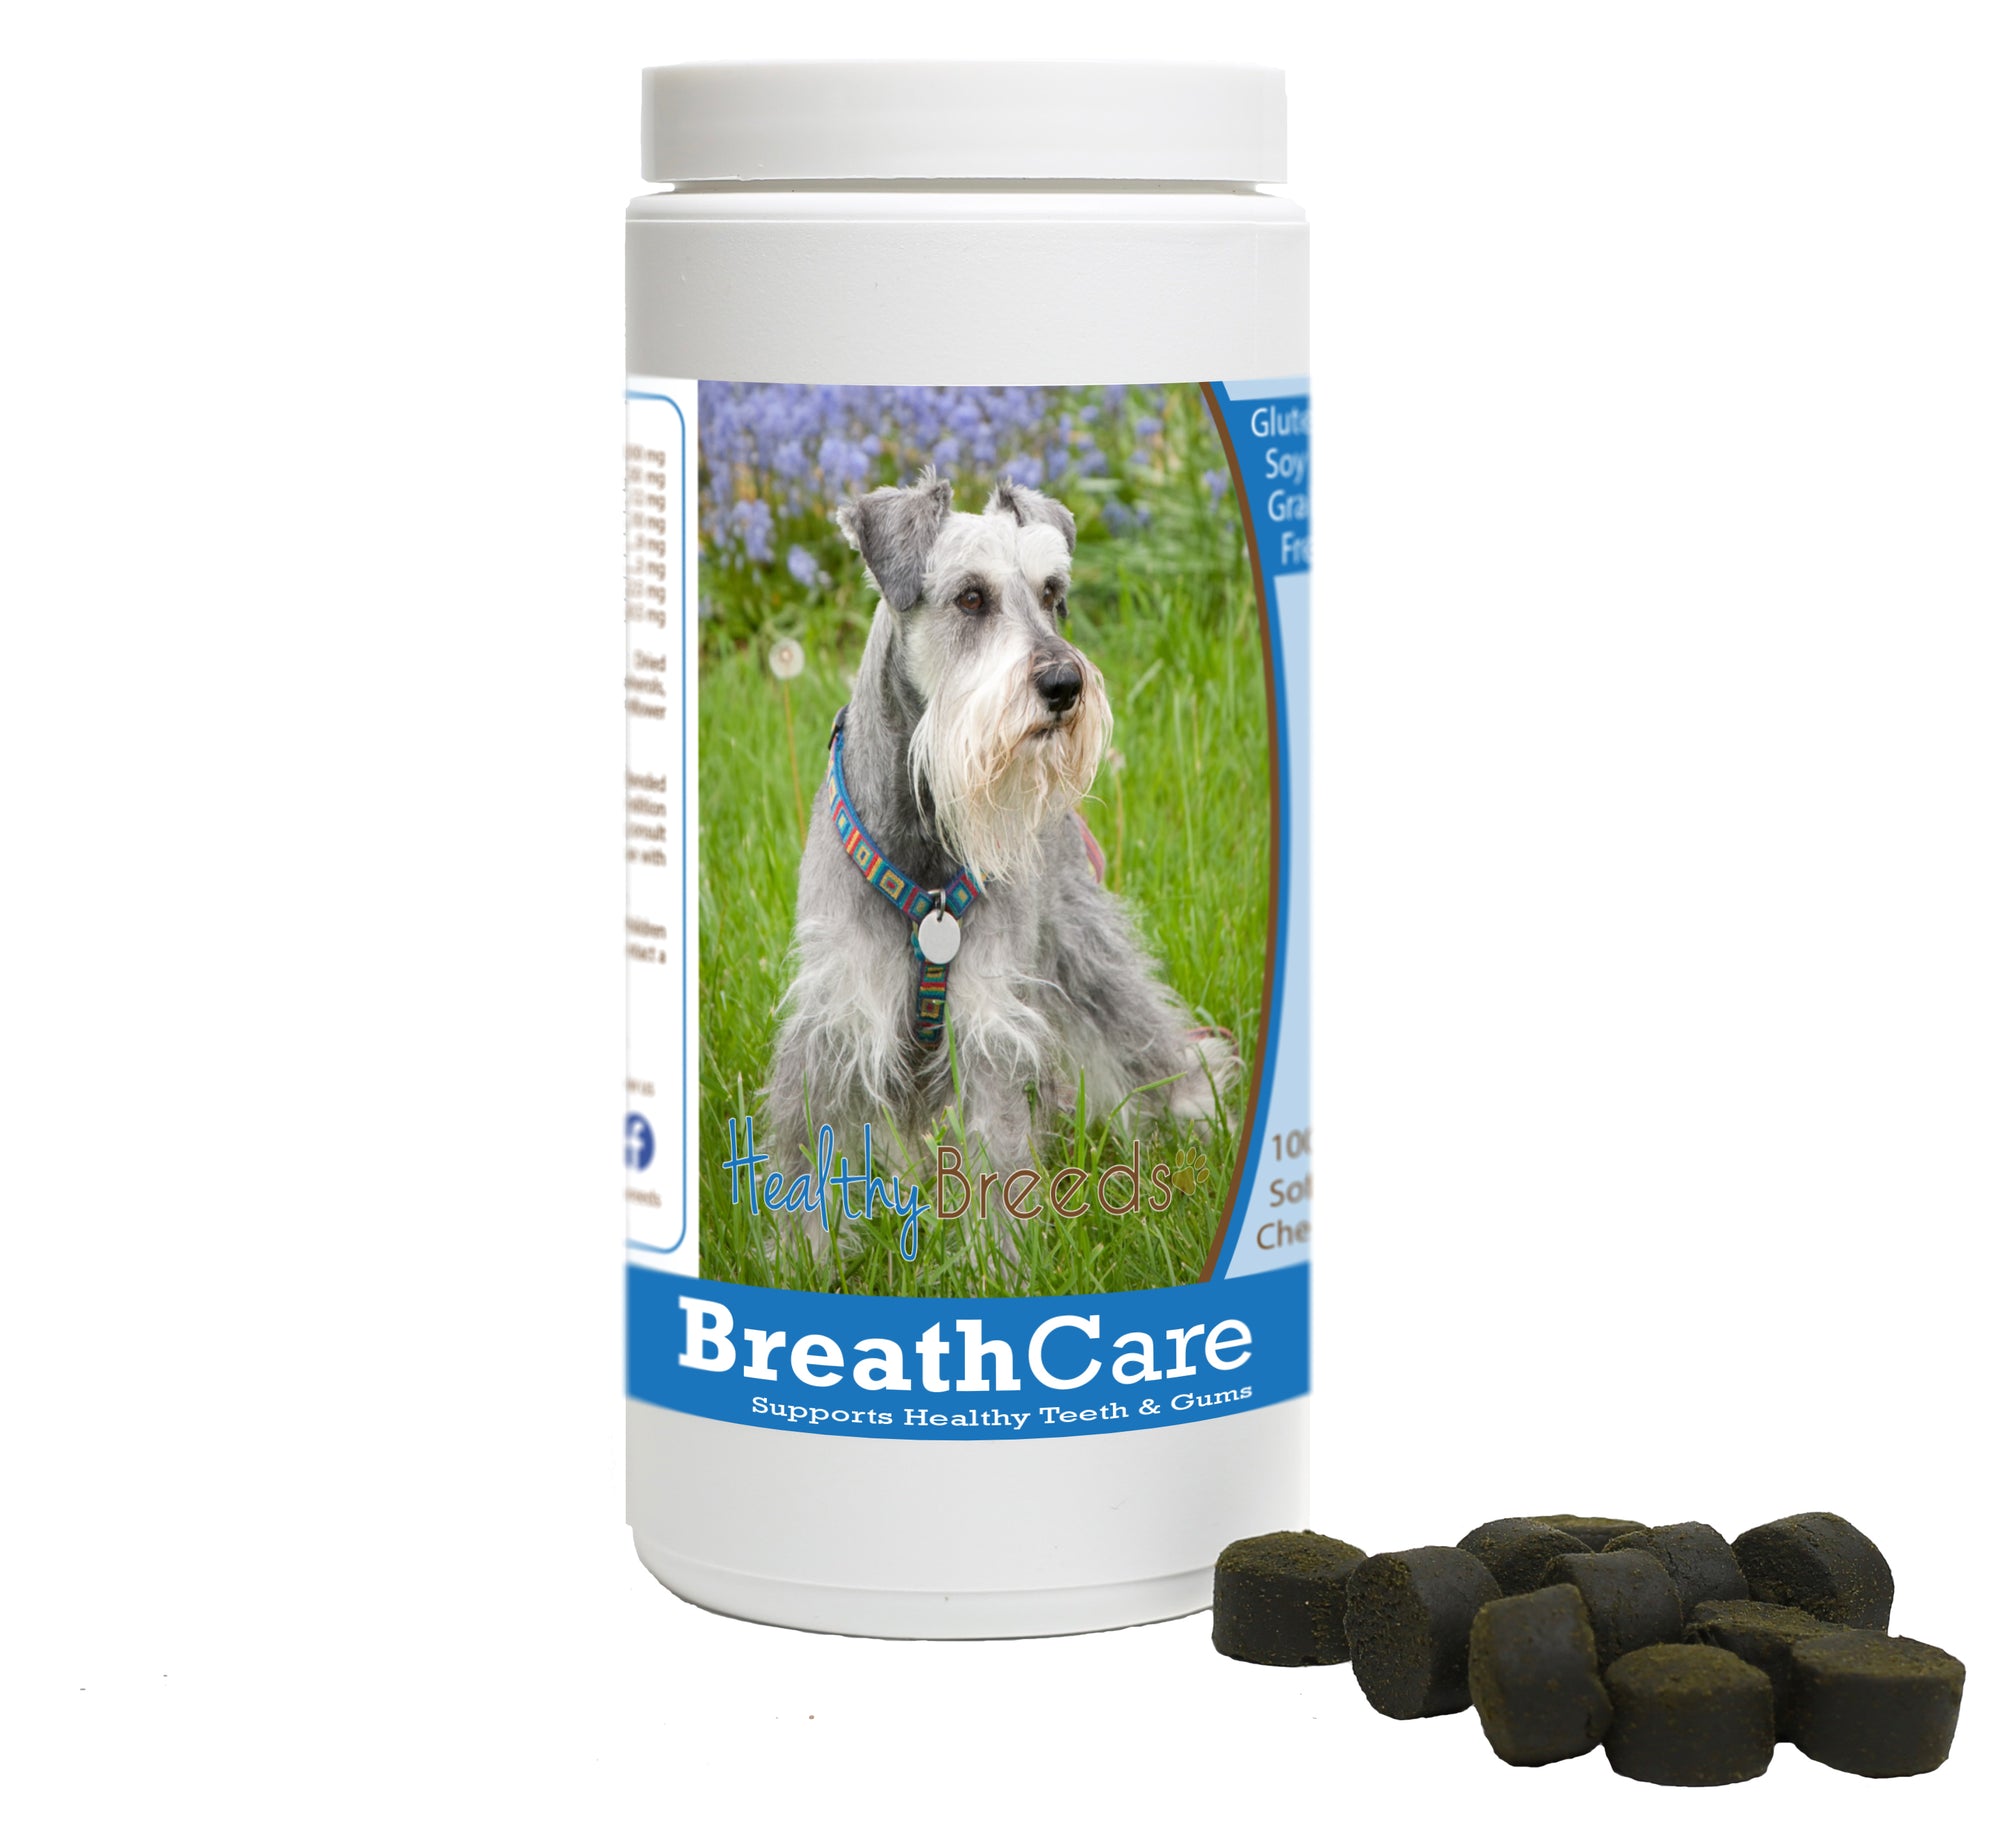 Healthy Breeds Miniature Schnauzer Breath Care Soft Chews for Dogs 60 Count